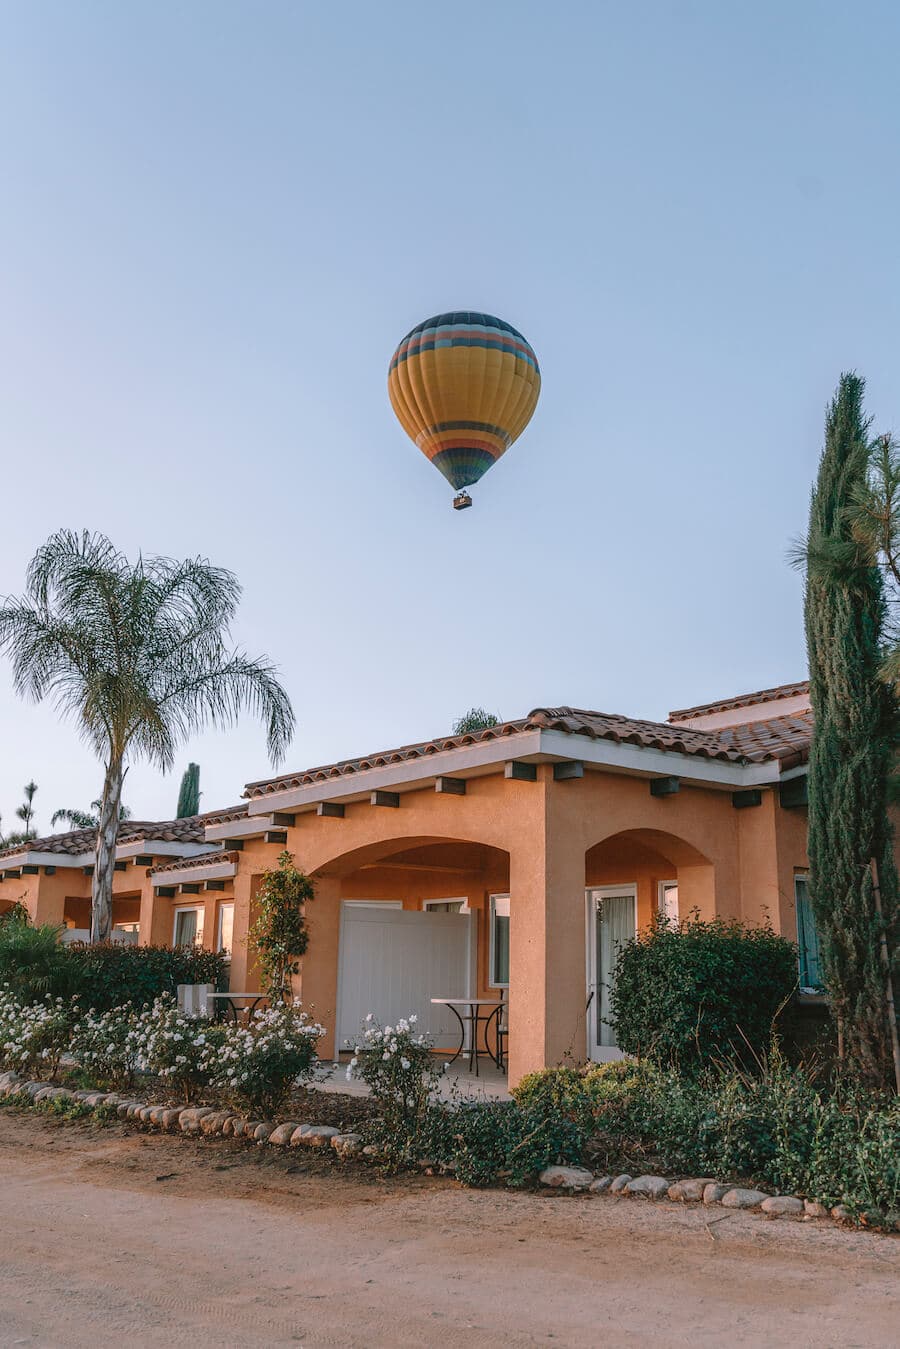 Hot air balloon flying over Carter Estate Winery